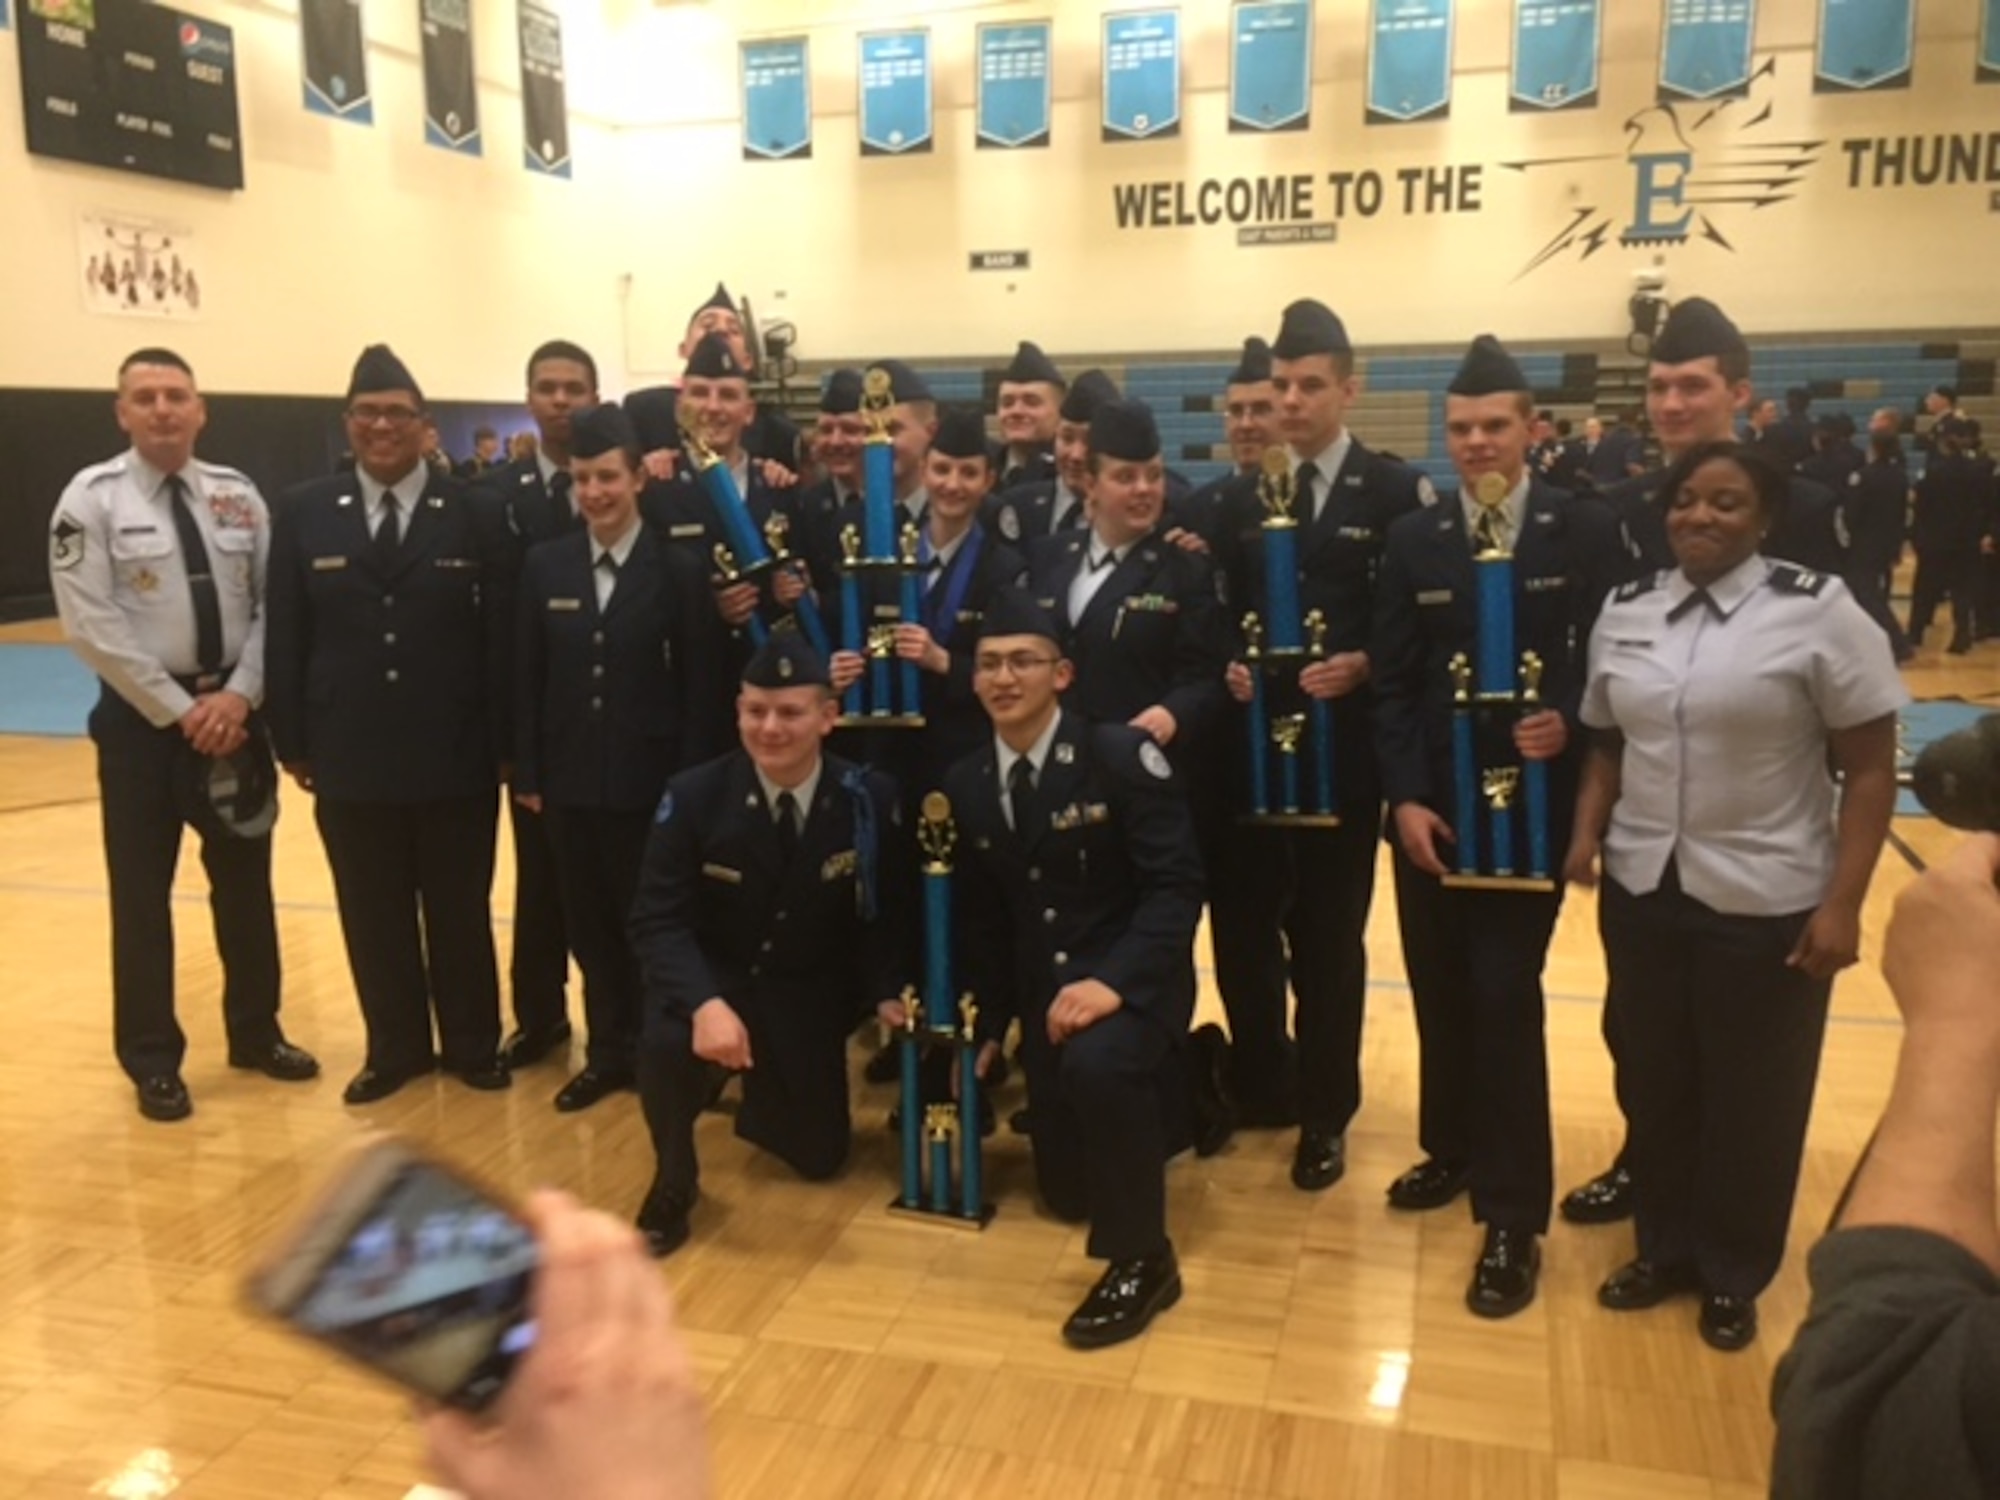 Master Sgt. Doumit Elias, 90th Missile Security Forces Squadron chief of standards and evaluations, far left, stands with the East High School Air Force Junior ROTC honor guard drill team during a competition in Cheyenne, Wyo., March 18, 2017. The East High School team took home four trophies including best overall honor guard team. (U.S. Air Force courtesy photo)